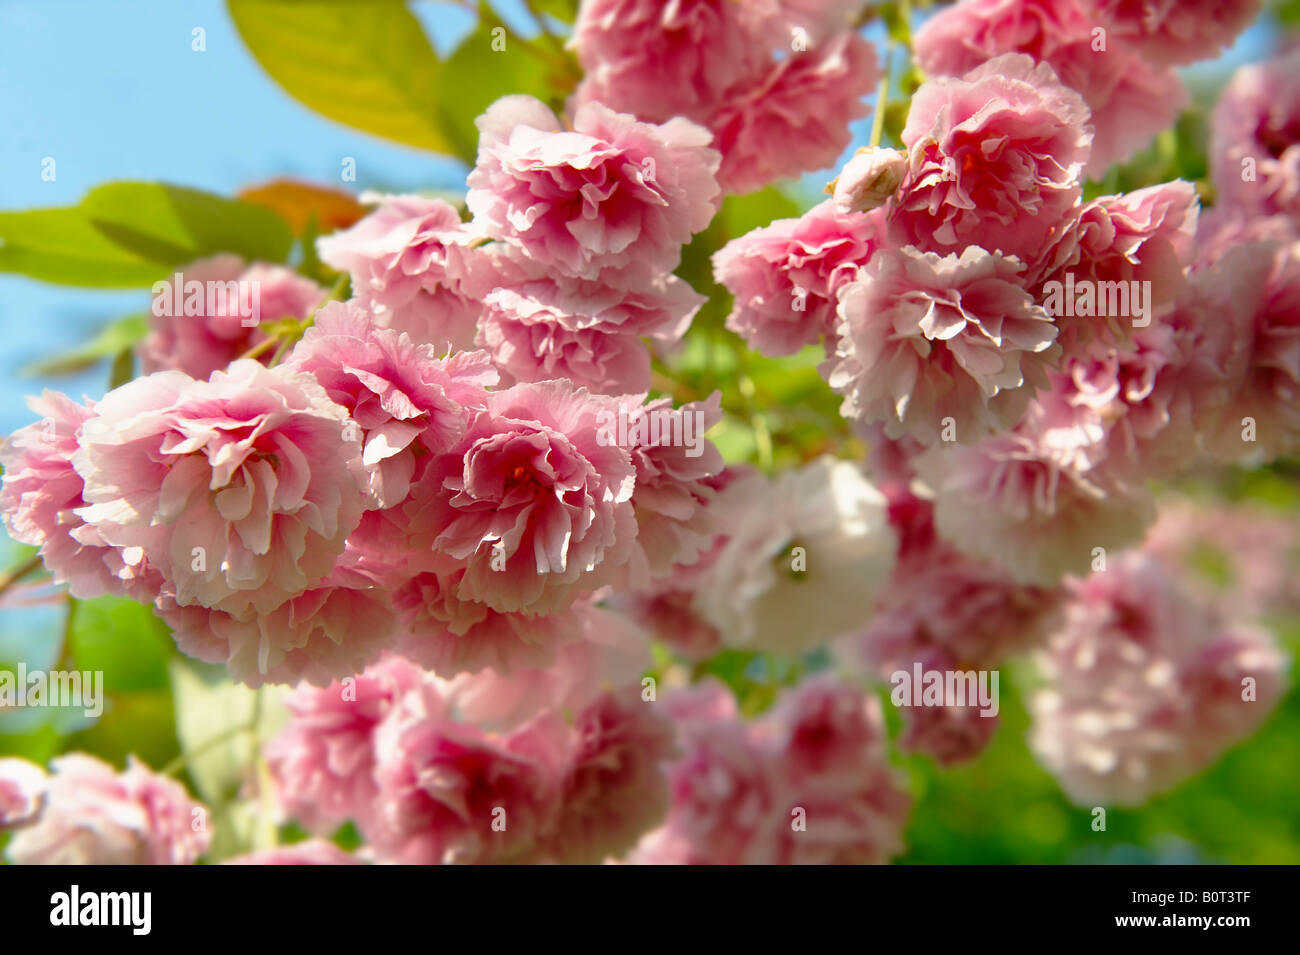 Pink flowering cherry blossom growing on a cherry tree in sunshine Stock Photo